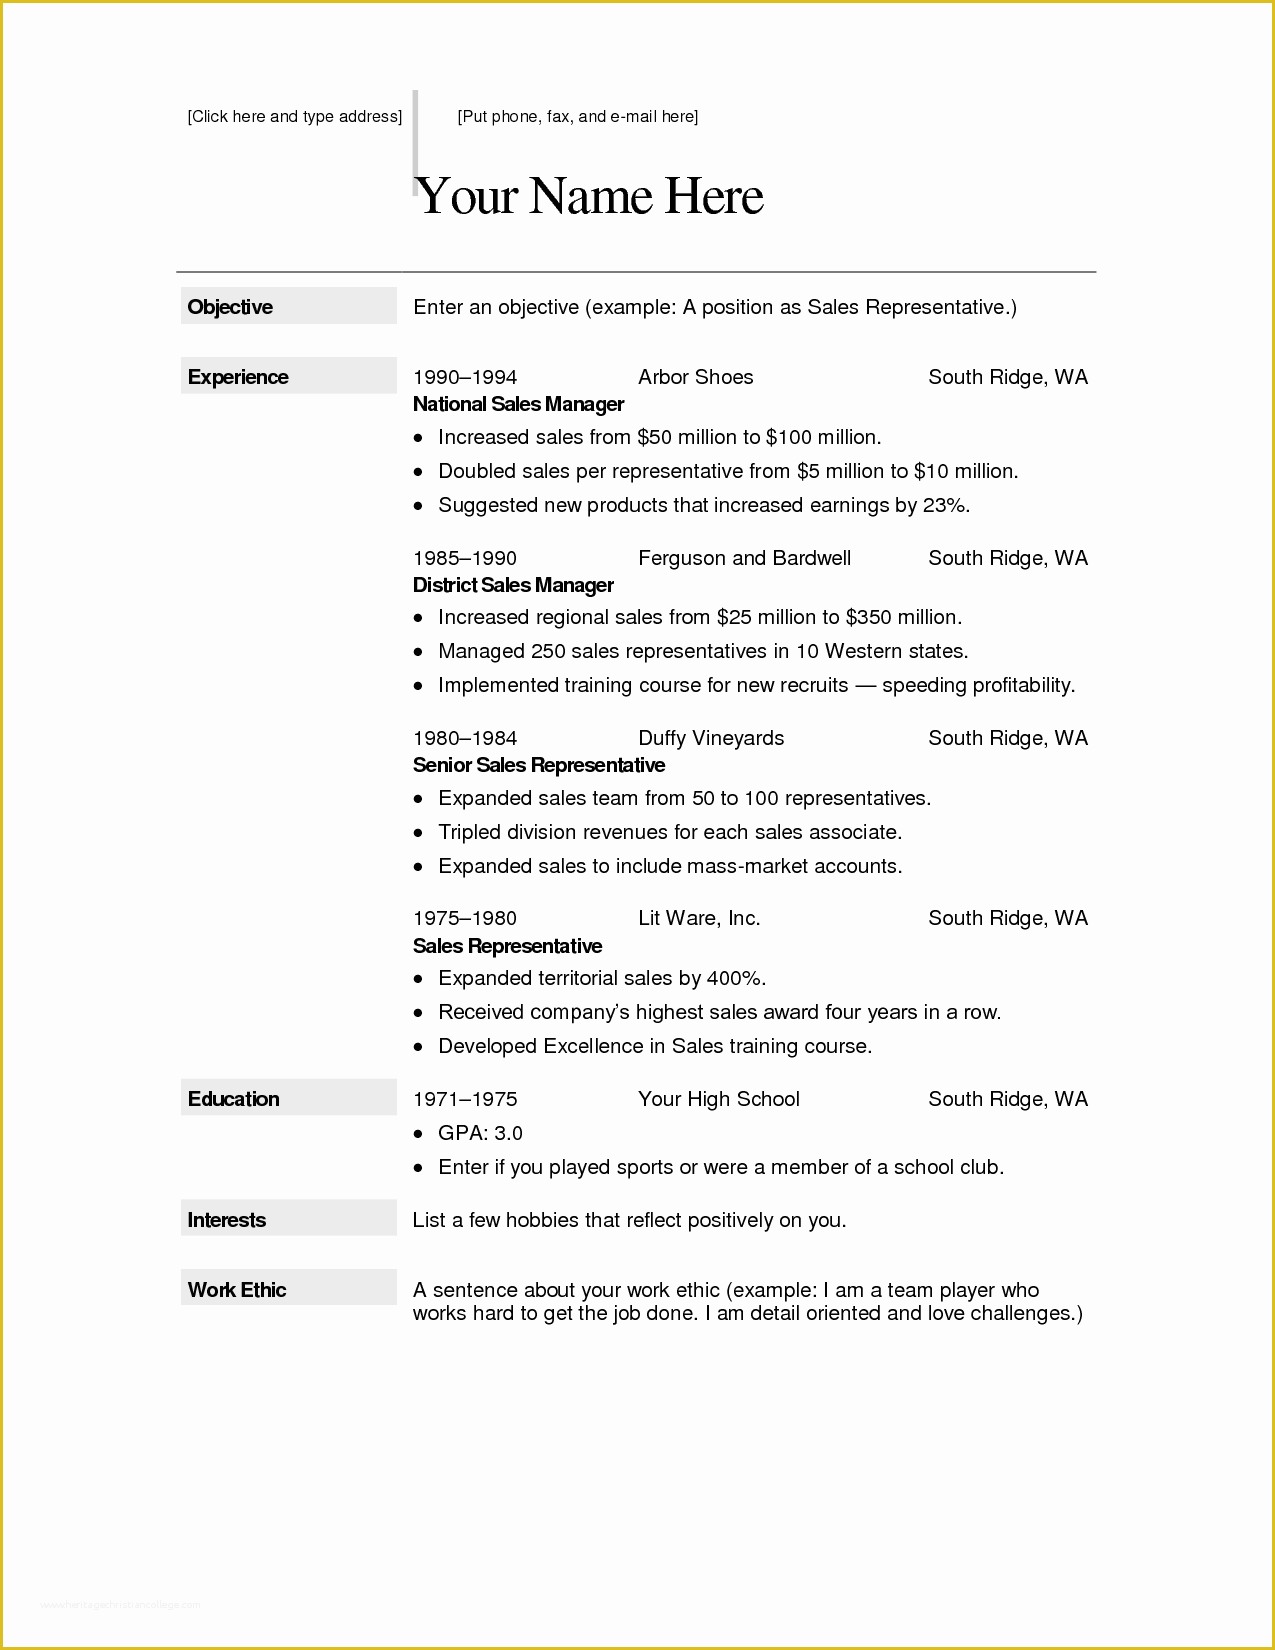 Free Apple Pages Resume Templates Of Free Creative Resume Templates for Macfree Creative Resume